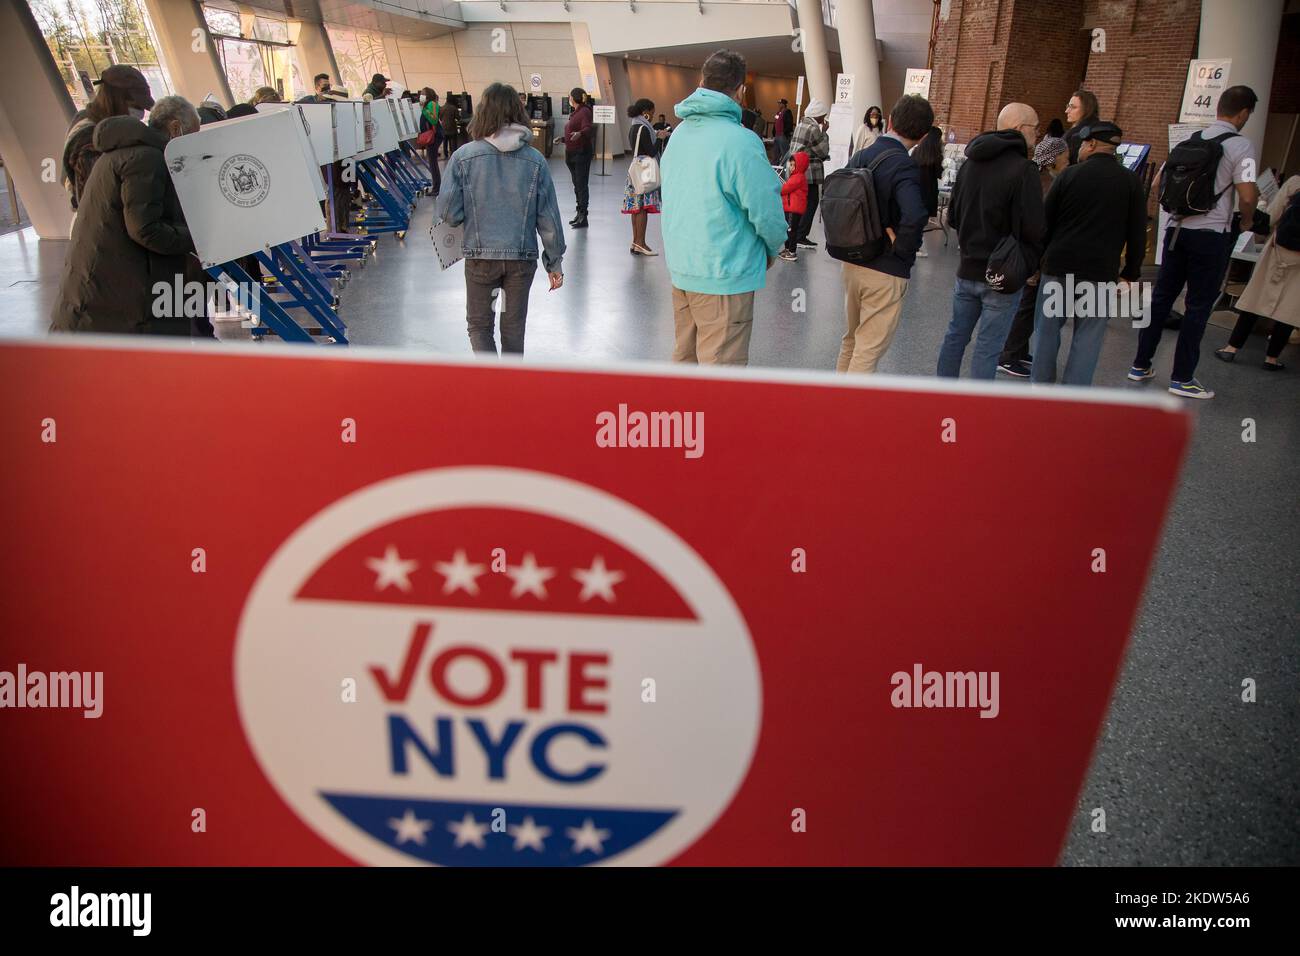 New York, USA. 8th Nov, 2022. Voters are seen at a polling station in New York, the United States, on Nov. 8, 2022. Concerned voters across the United States are going to the polls to cast their ballots in the 2022 midterm elections on Tuesday amid heightened partisanship and divide. Credit: Michael Nagle/Xinhua/Alamy Live News Stock Photo